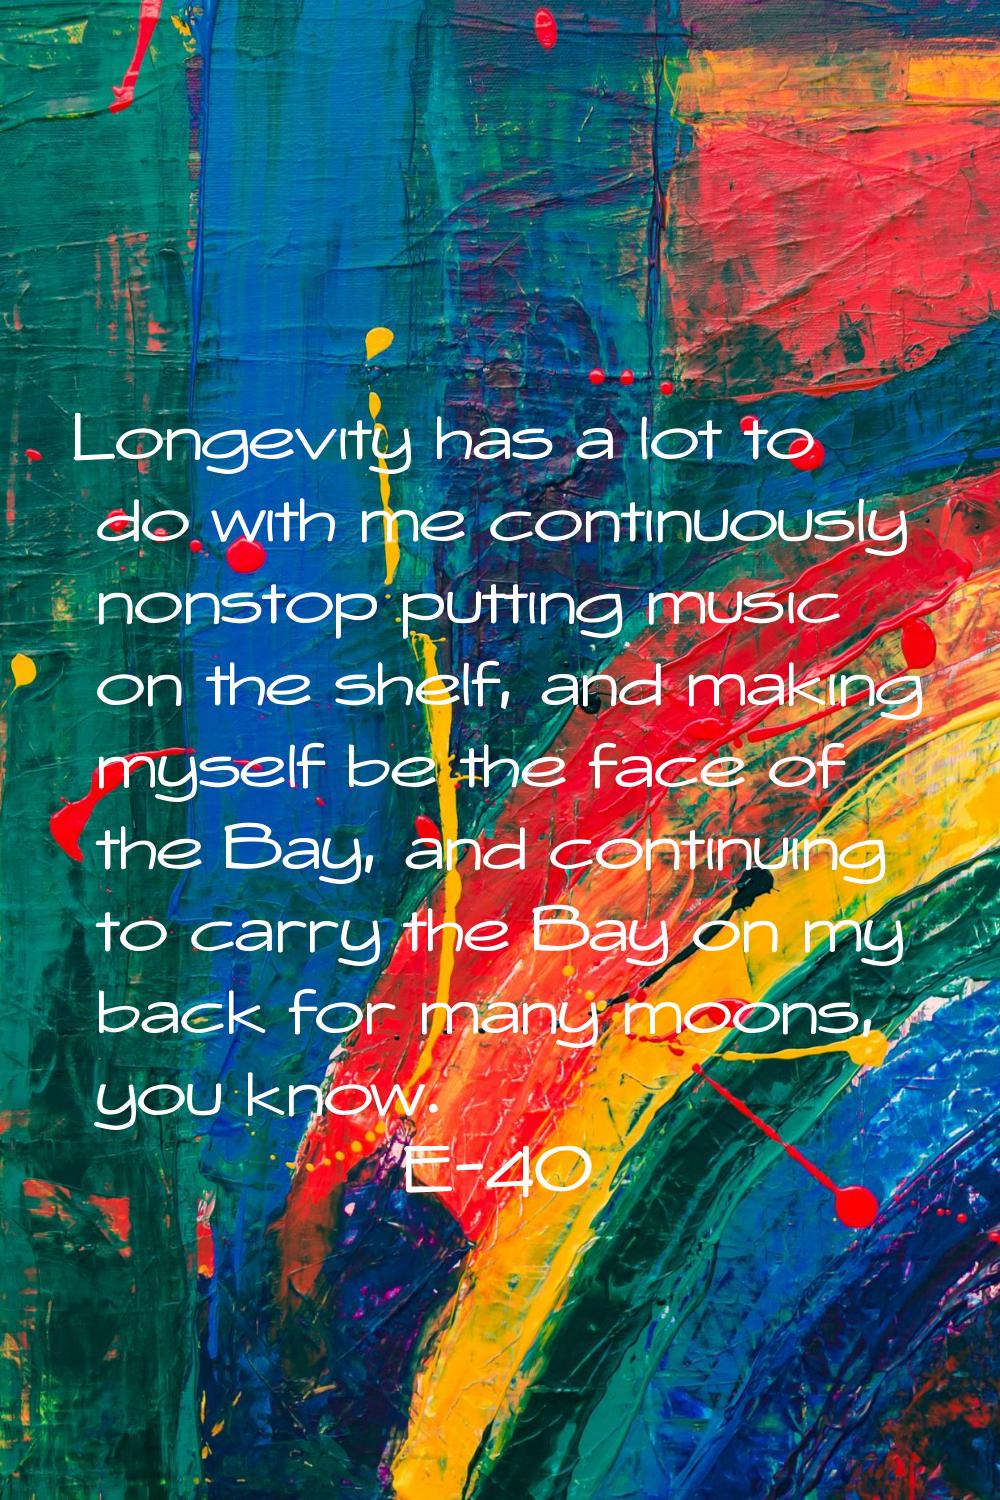 Longevity has a lot to do with me continuously nonstop putting music on the shelf, and making mysel